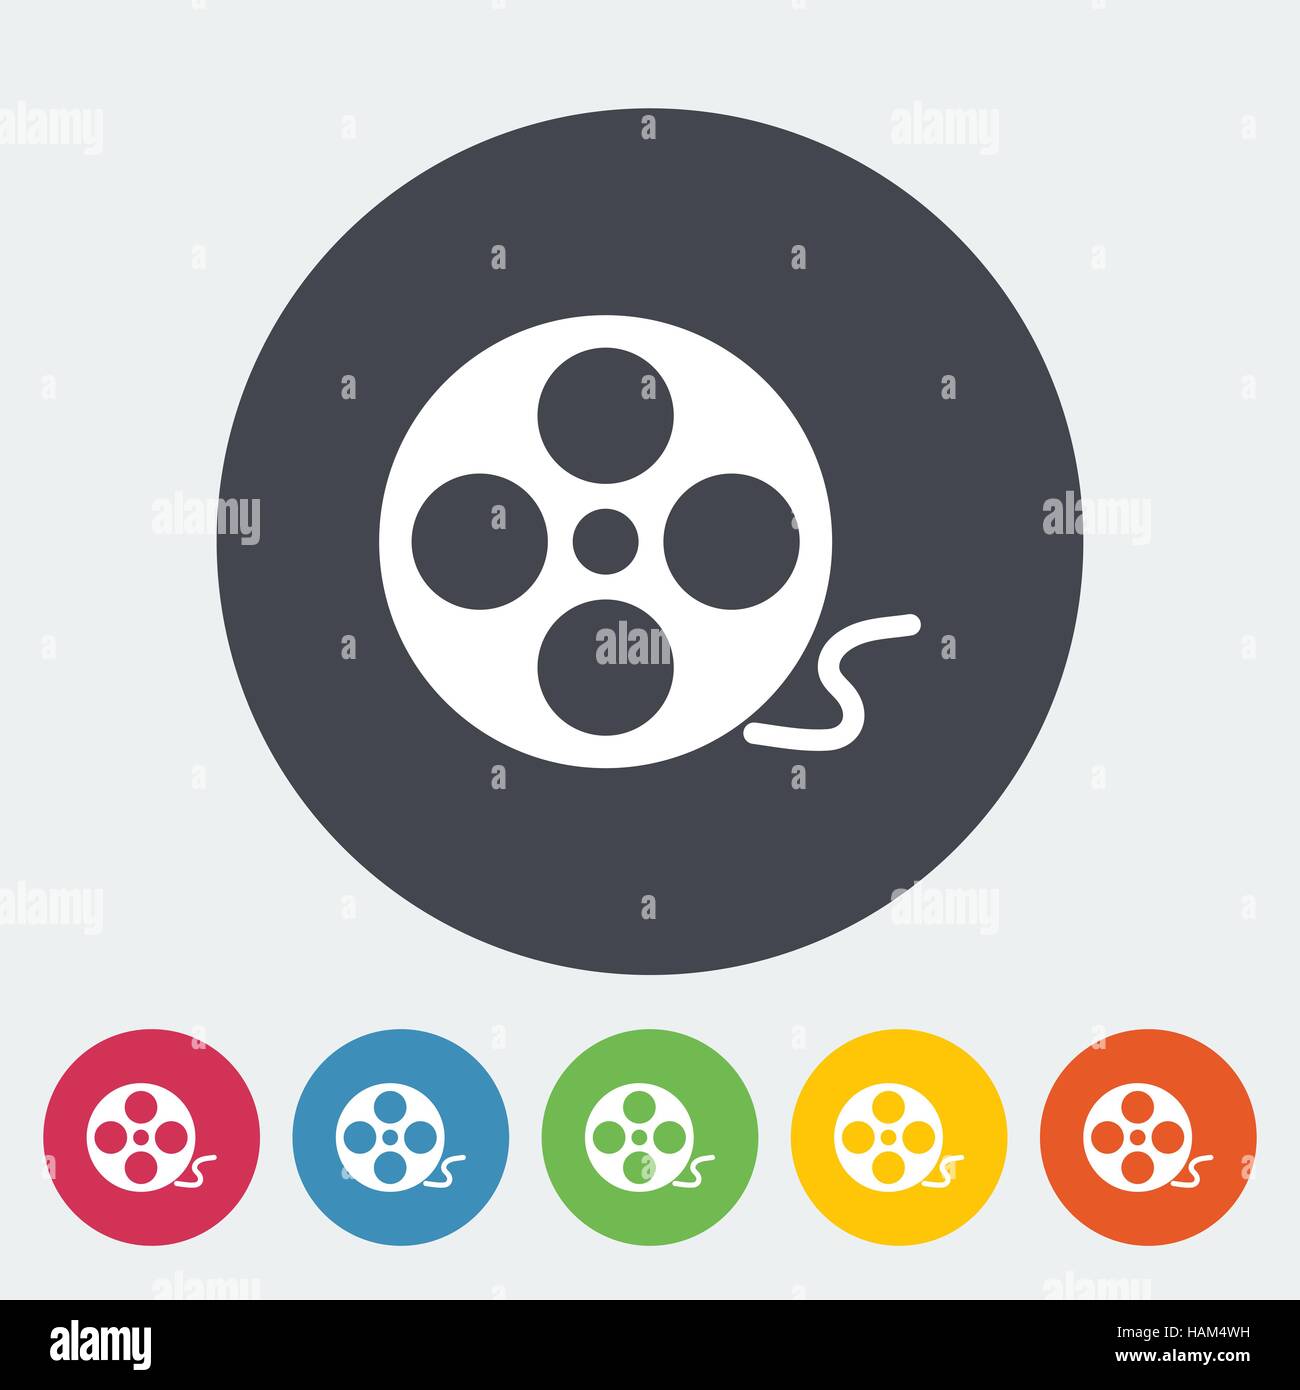 Reel of film. Single flat icon on the circle. Vector illustration. Stock Vector